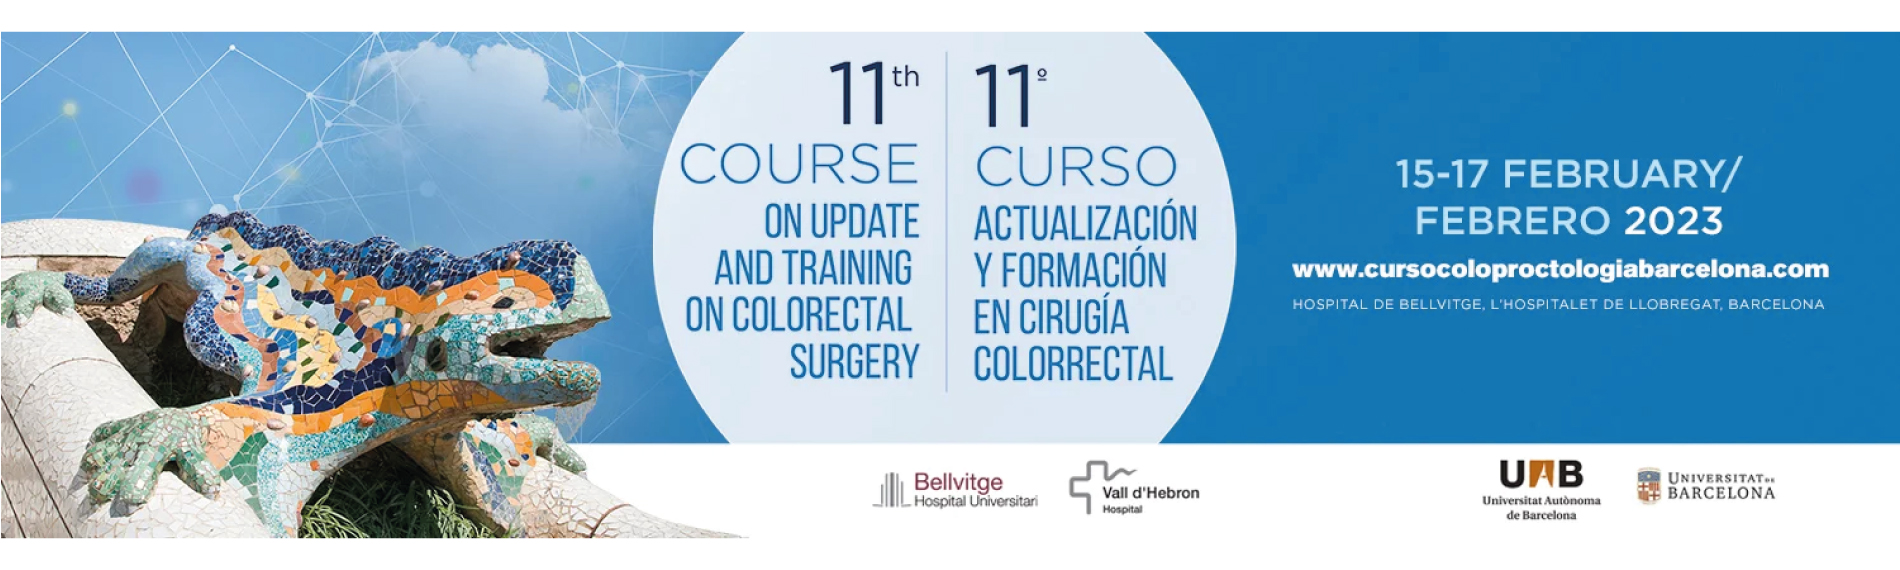 Course on Update and Training on Colorectal Surgery, 15-17 febbraio 2023, Barcelona